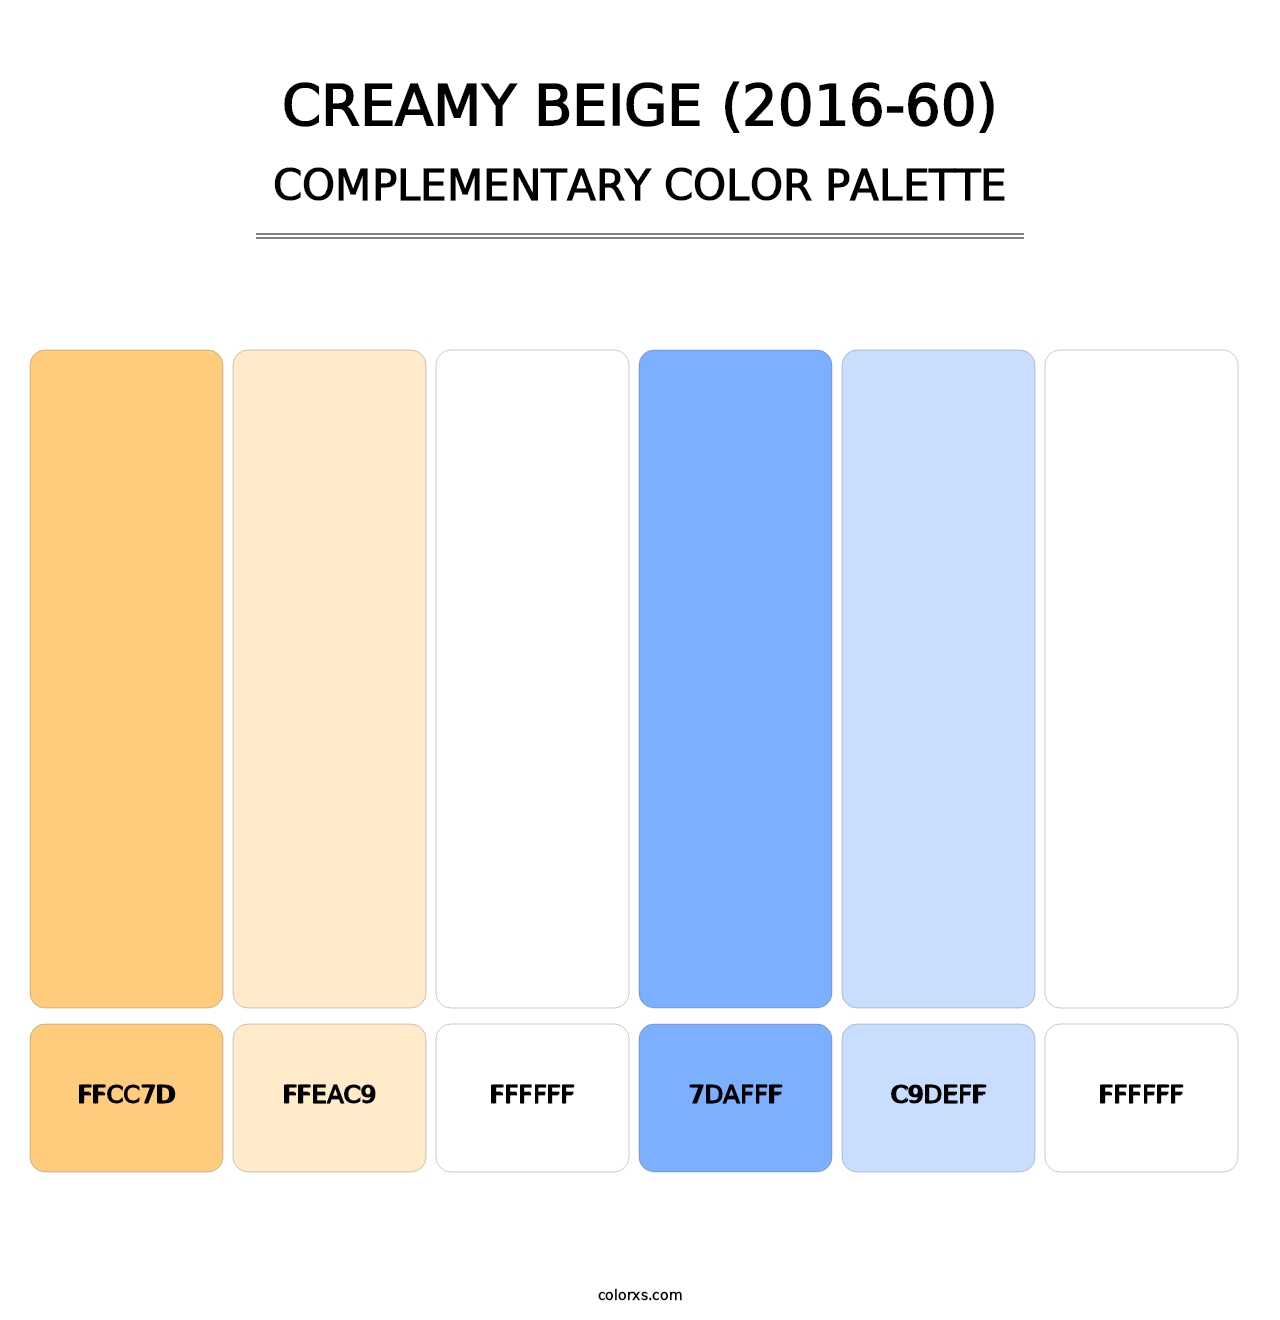 Creamy Beige (2016-60) - Complementary Color Palette